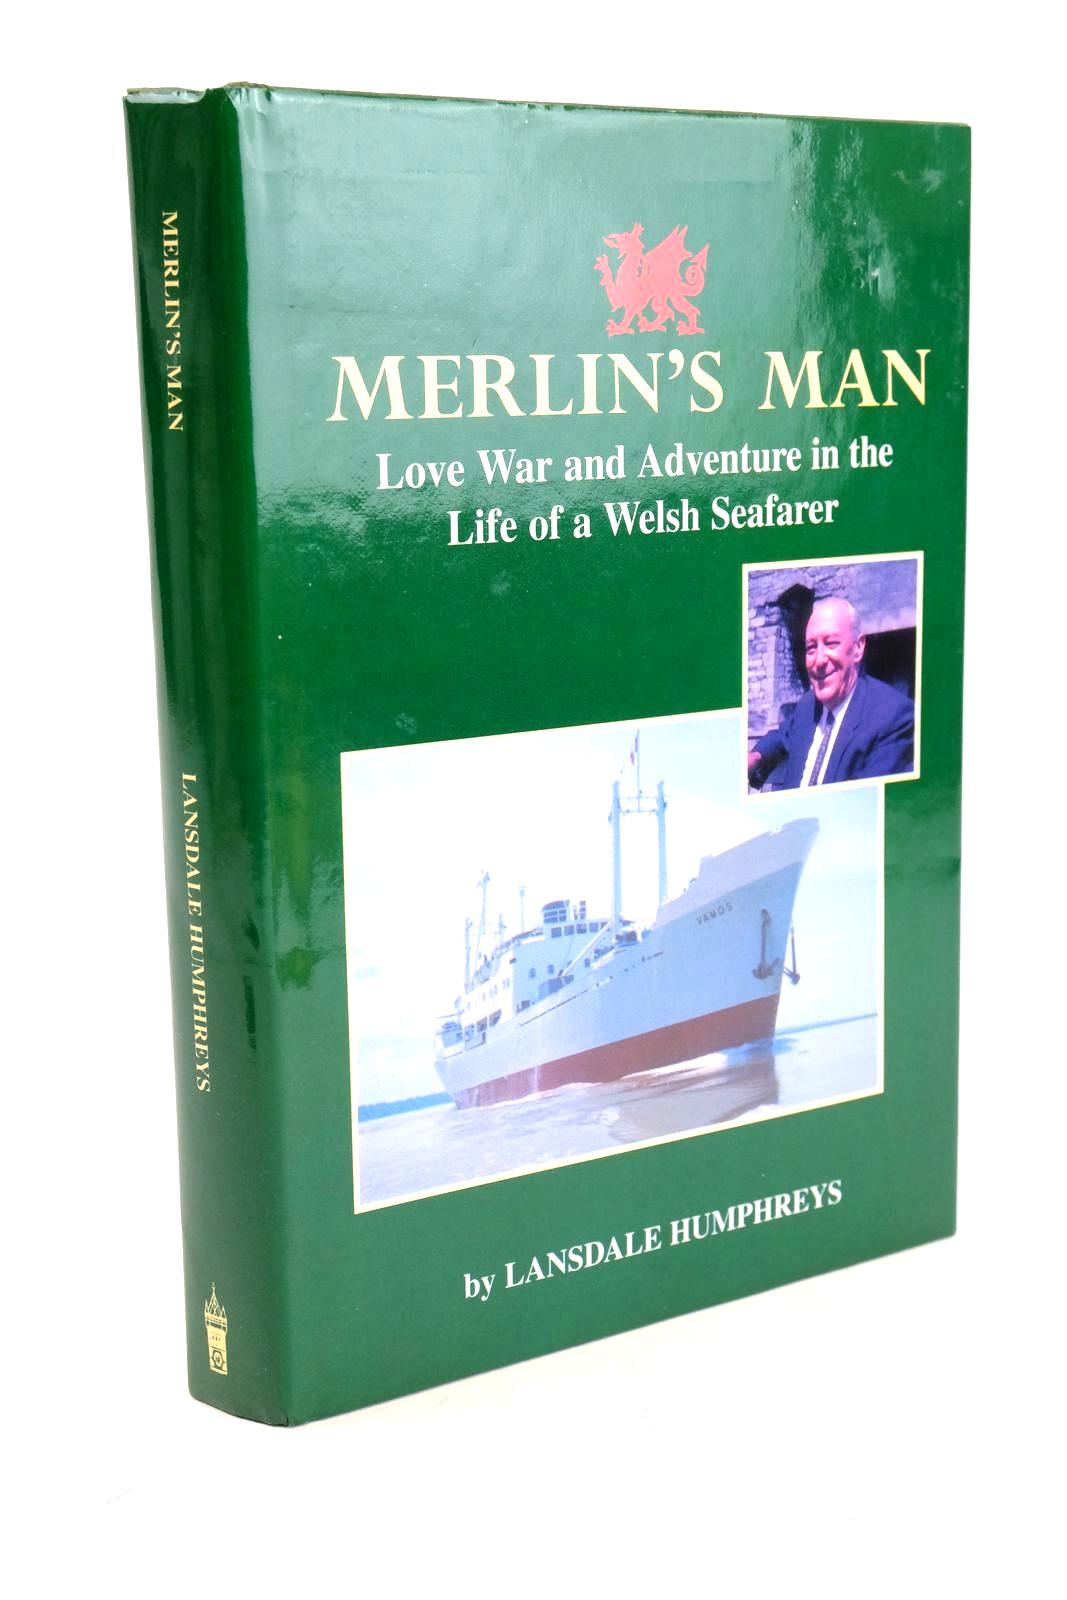 Photo of MERLIN'S MAN written by Humphreys, Lansdale published by P.M. Heaton Publishing (STOCK CODE: 1327157)  for sale by Stella & Rose's Books